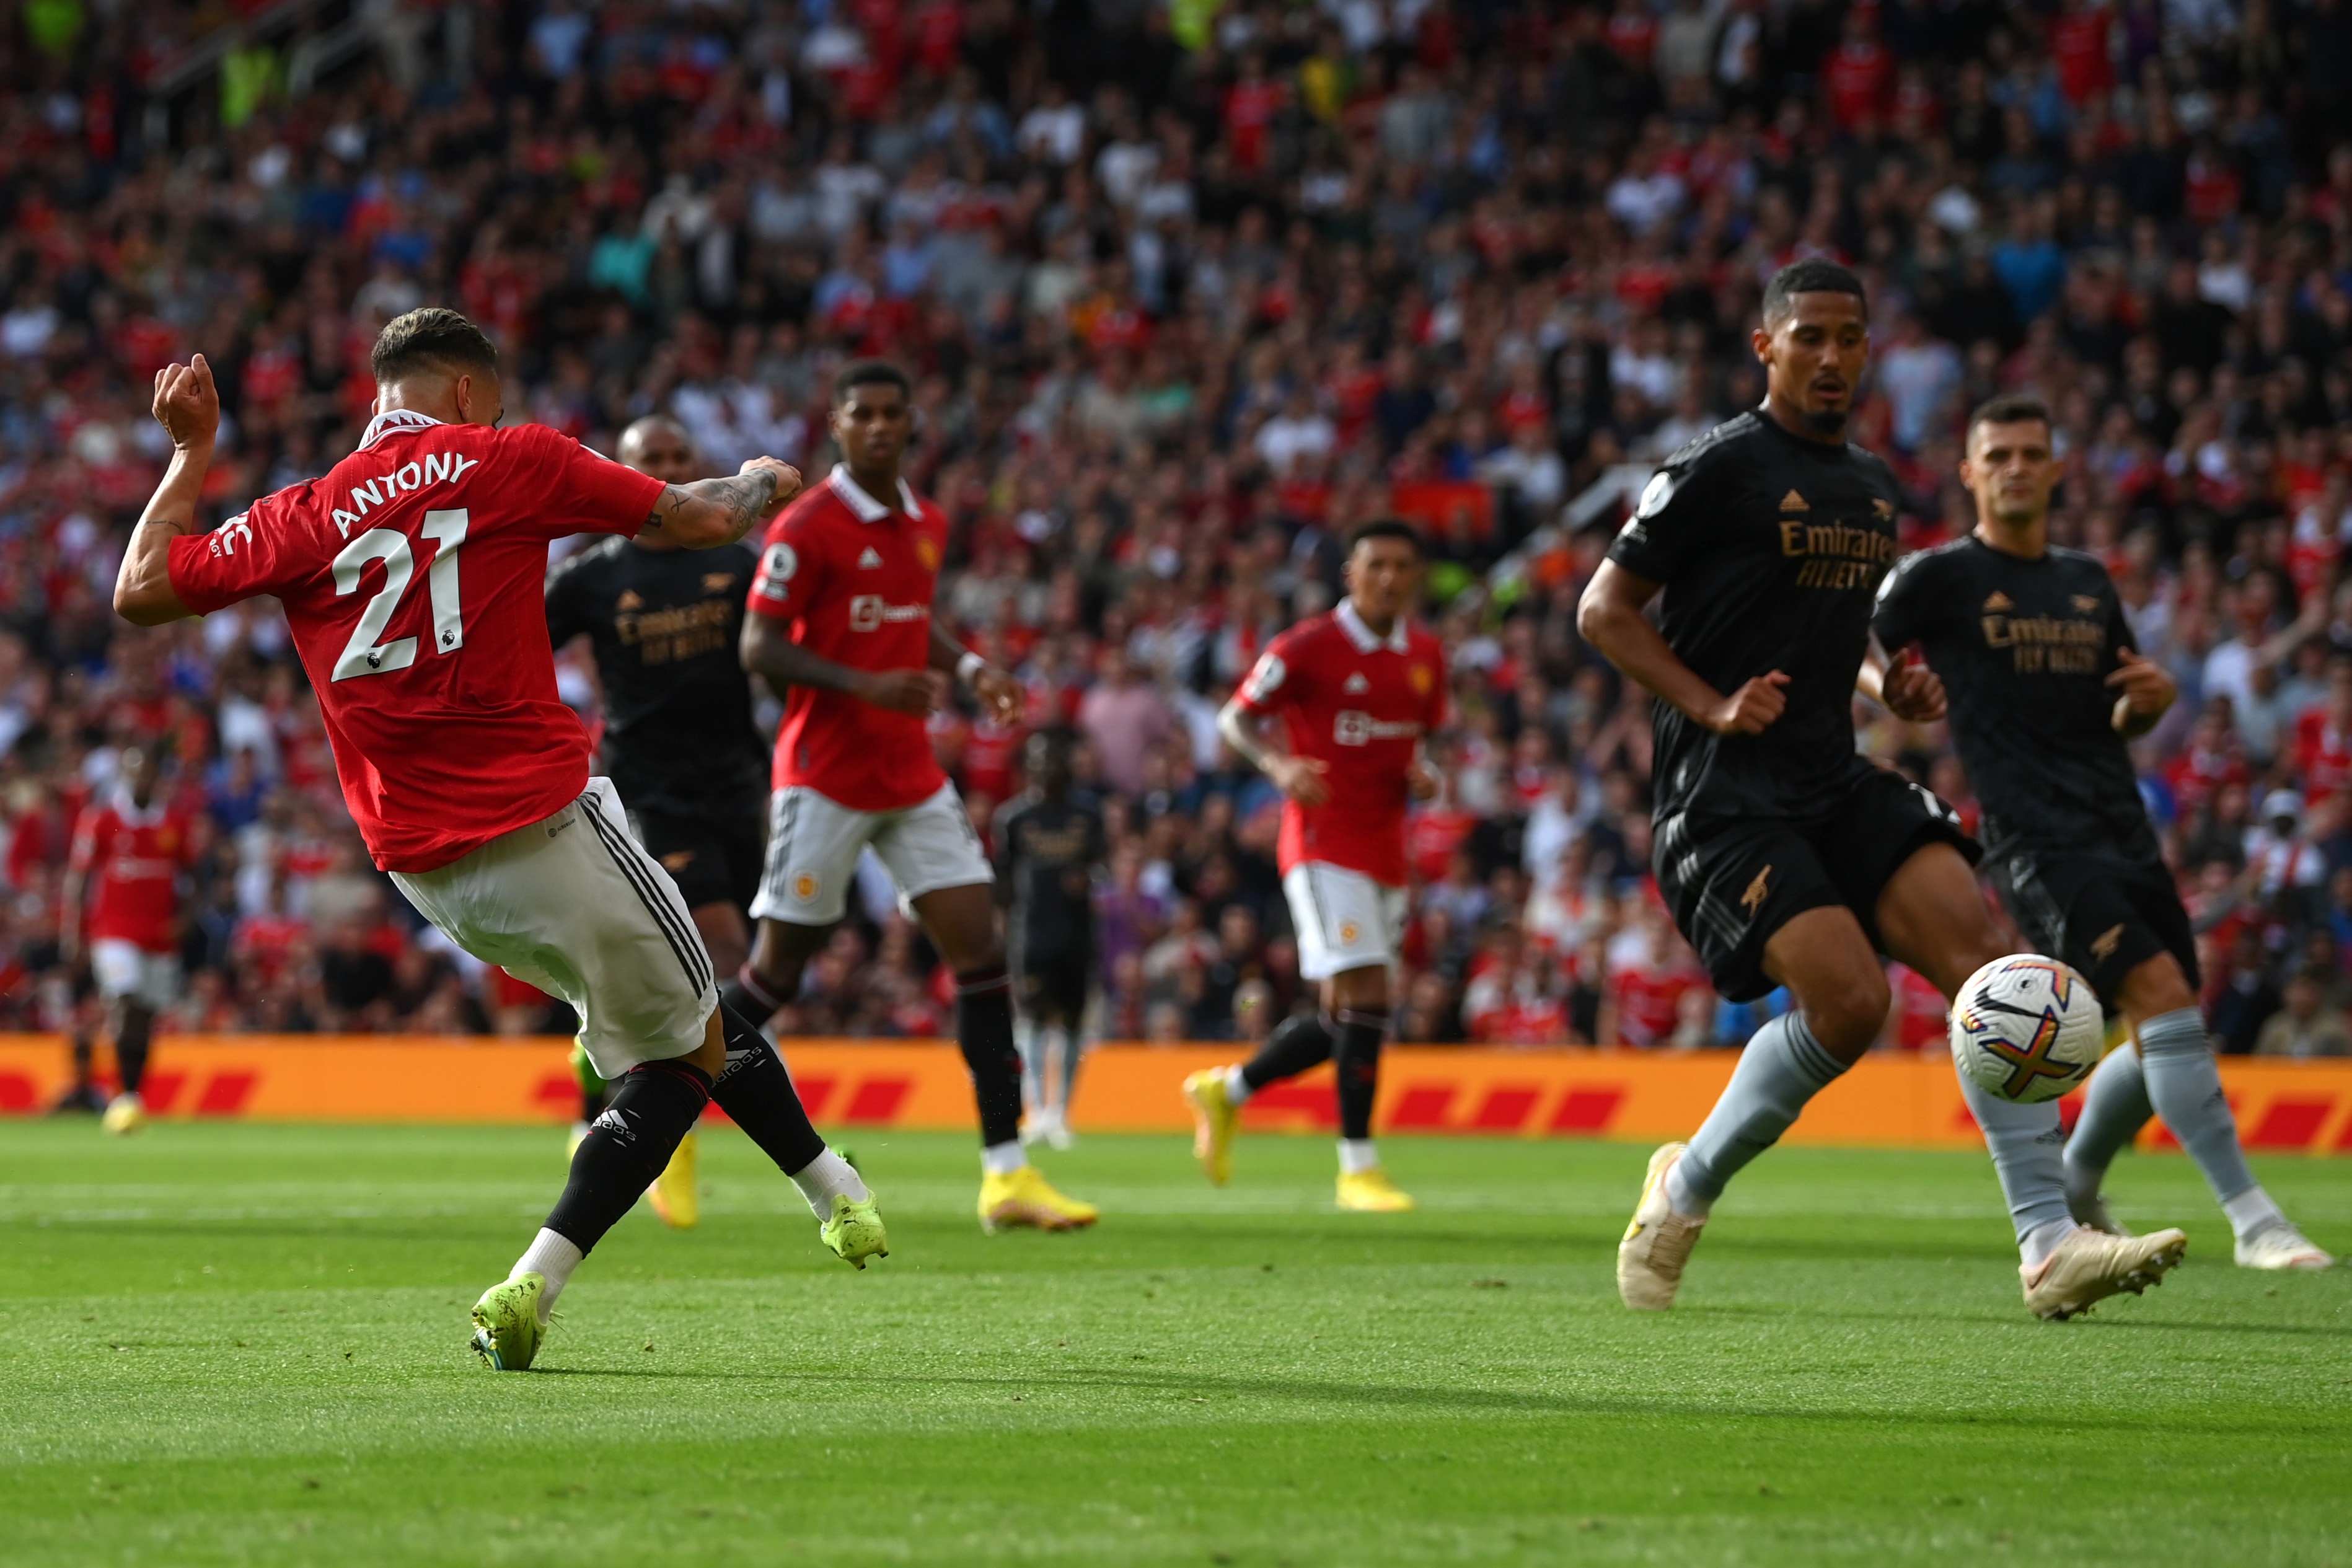 The result of the match between Manchester United and Arsenal in the English Premier League